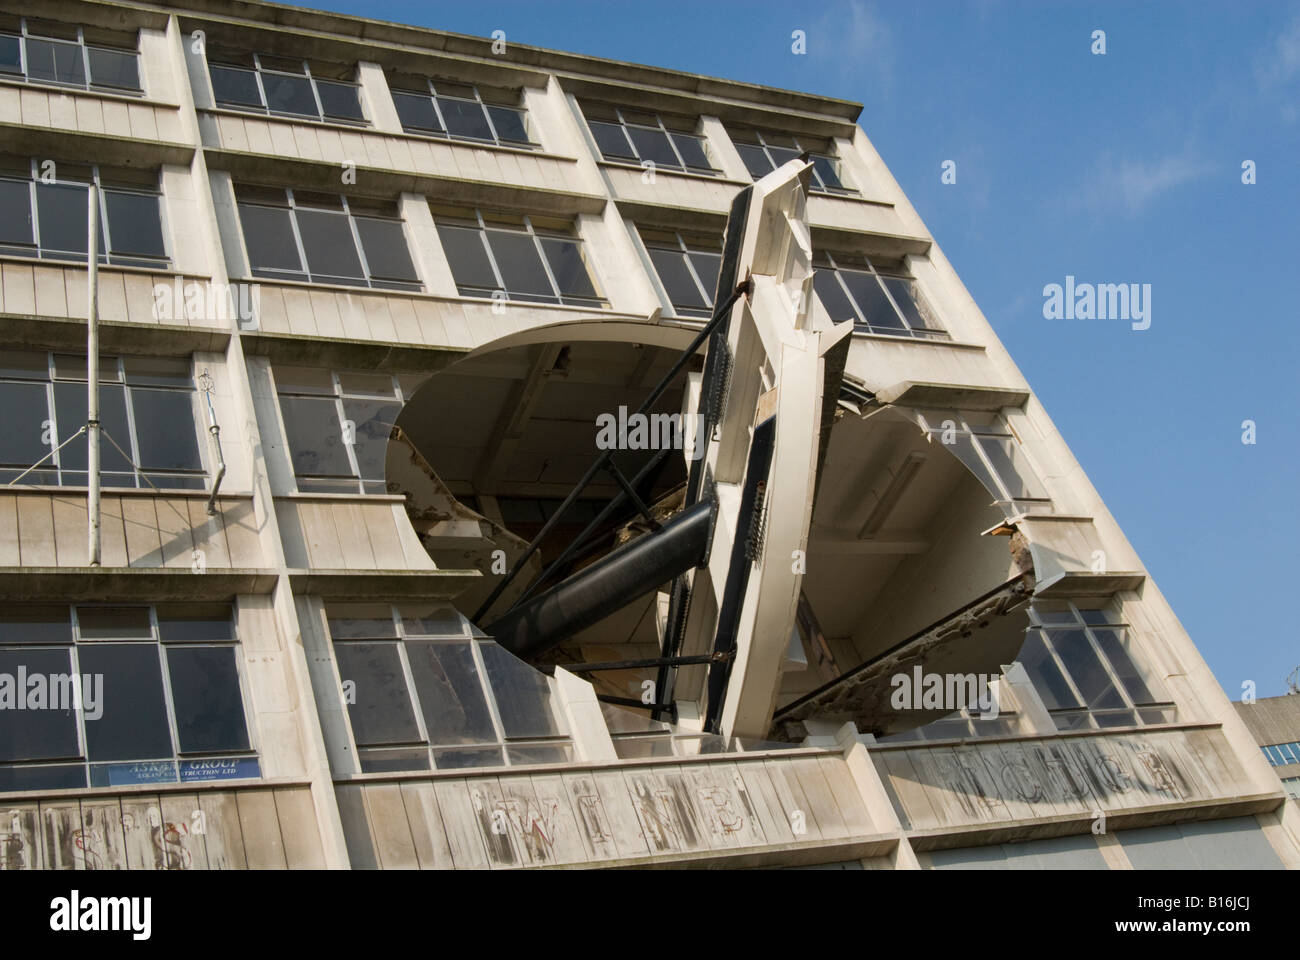 Turning The Place Over Richard Wilson Liverpool UK Stock Photo